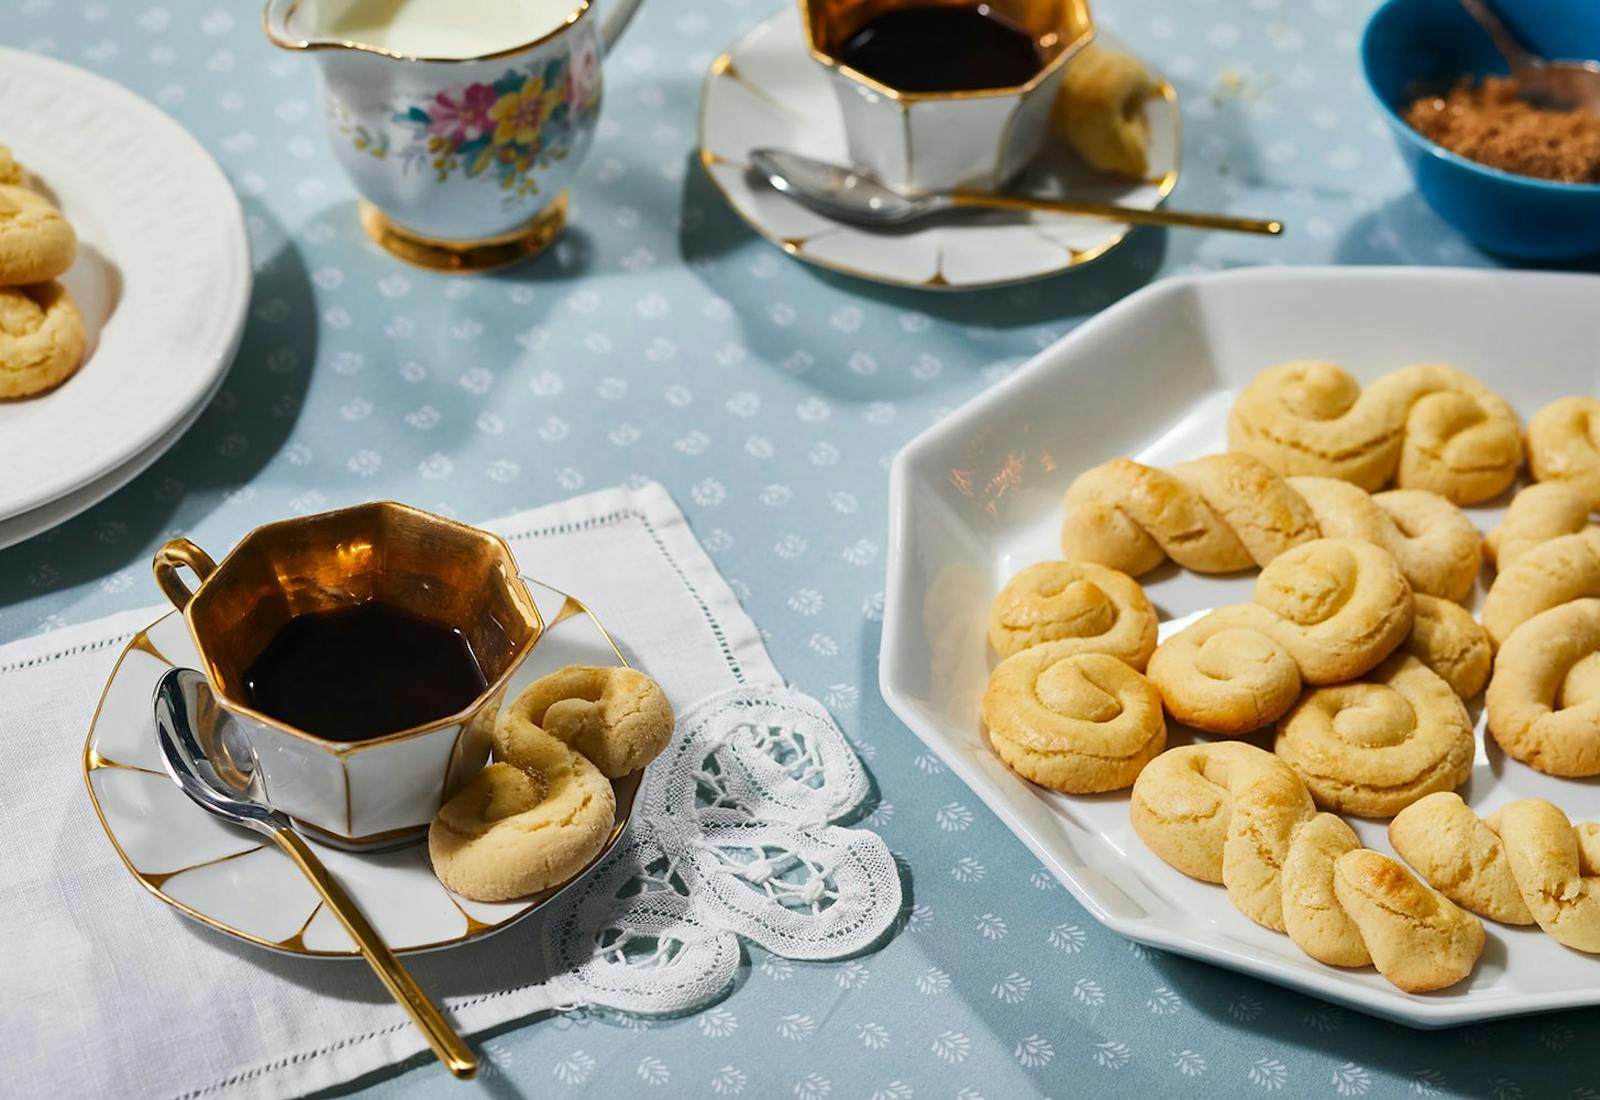 Cookies on white platter, small dishes with tea, cream.